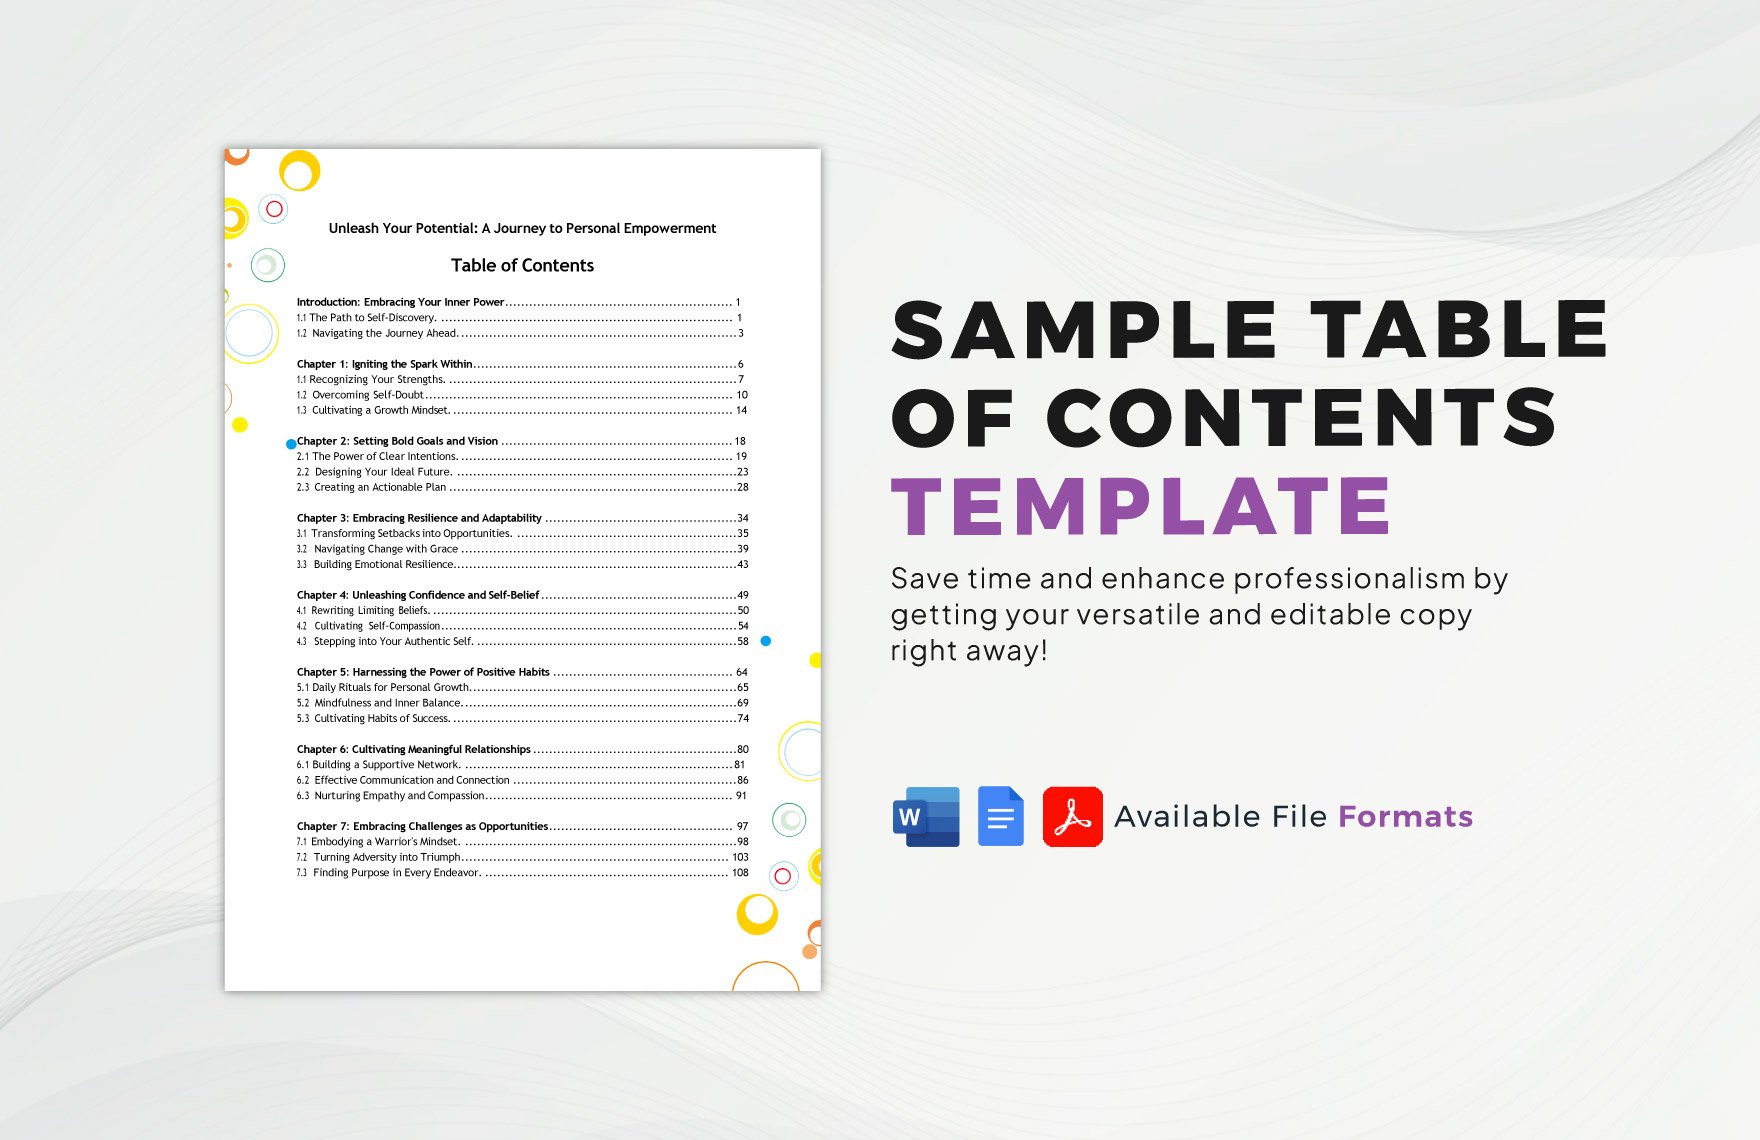 Free Sample Table Of Contents Template in Word, Google Docs, PDF, Apple Pages, Publisher